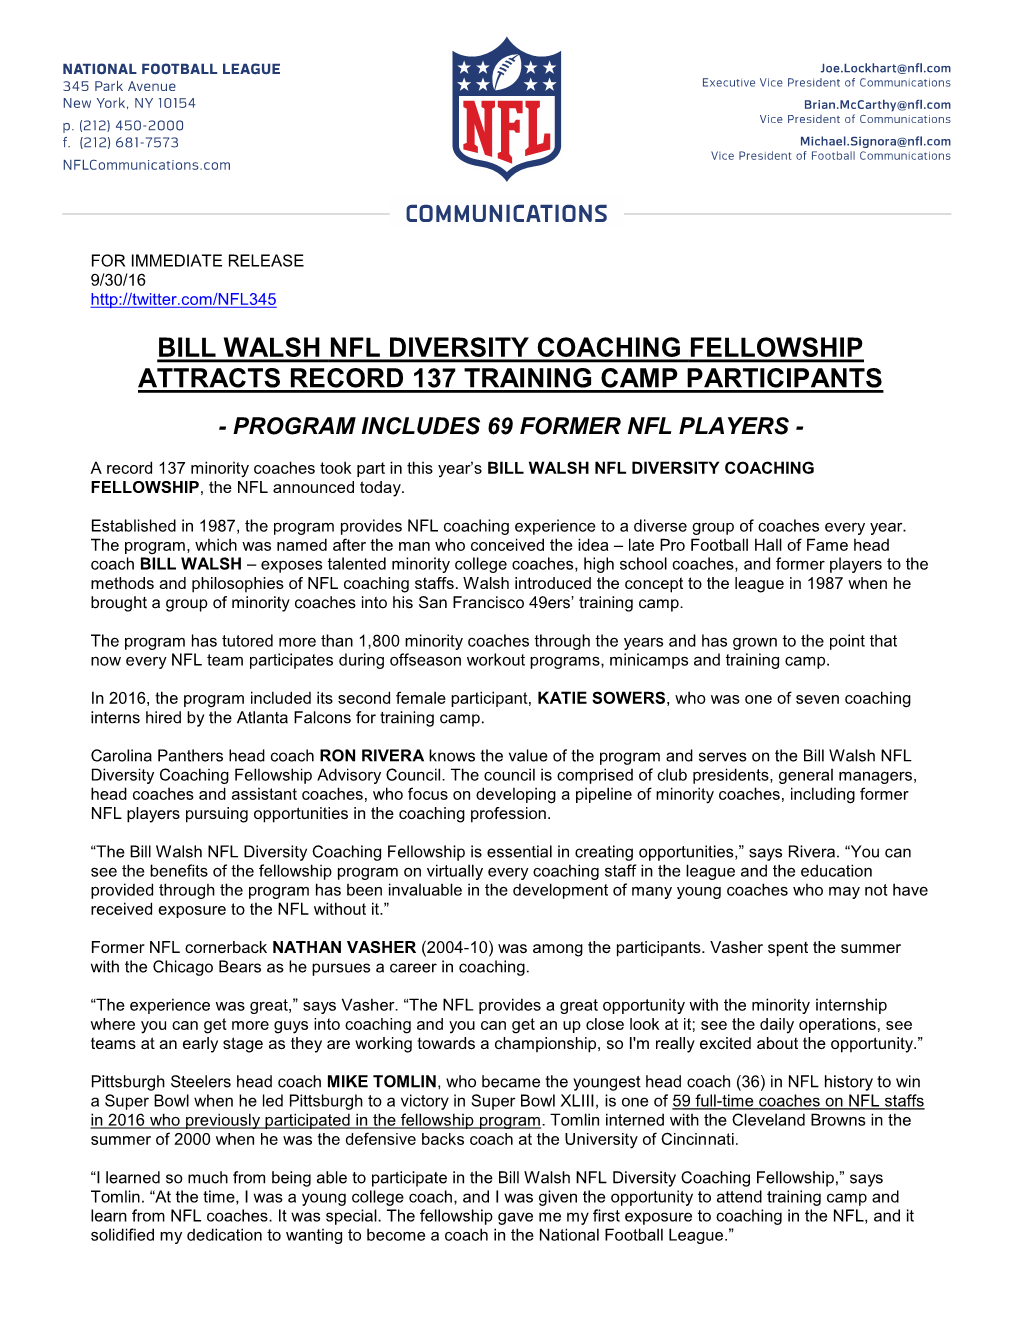 Bill Walsh Nfl Diversity Coaching Fellowship Attracts Record 137 Training Camp Participants